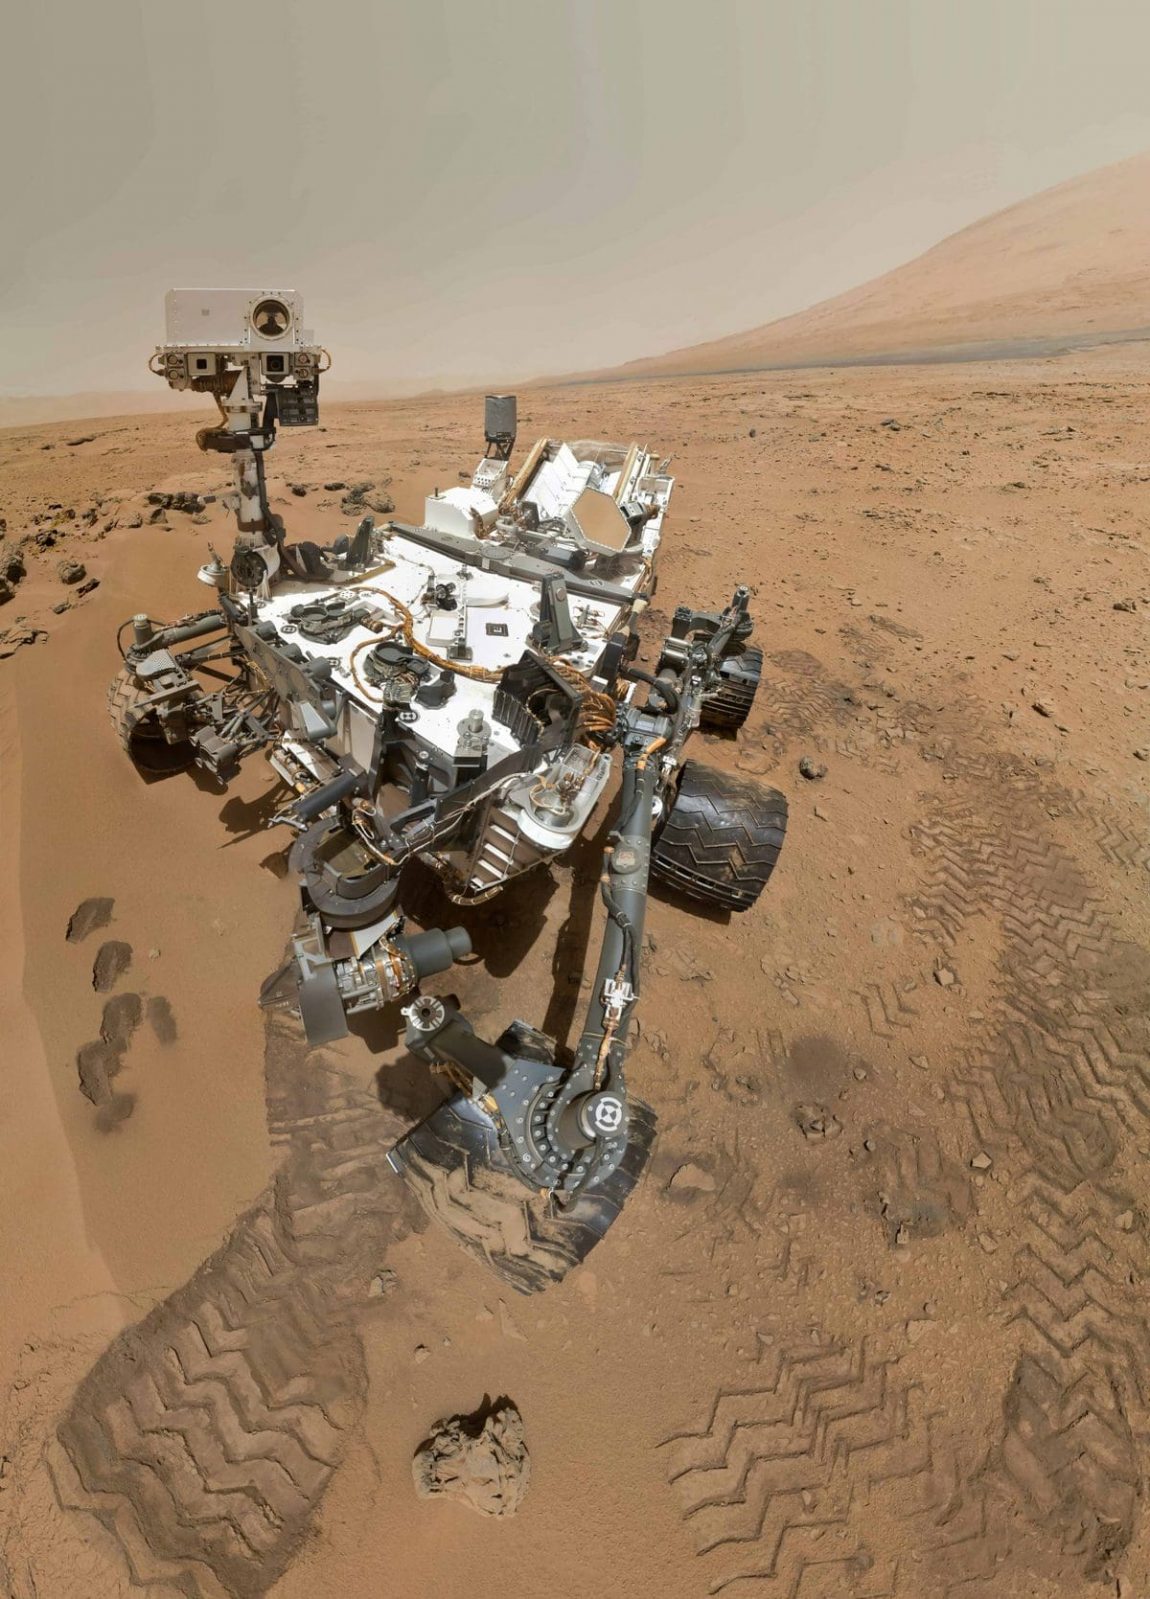 PIA16239 High Resolution Self Portrait by Curiosity Rover Arm Camera scaled